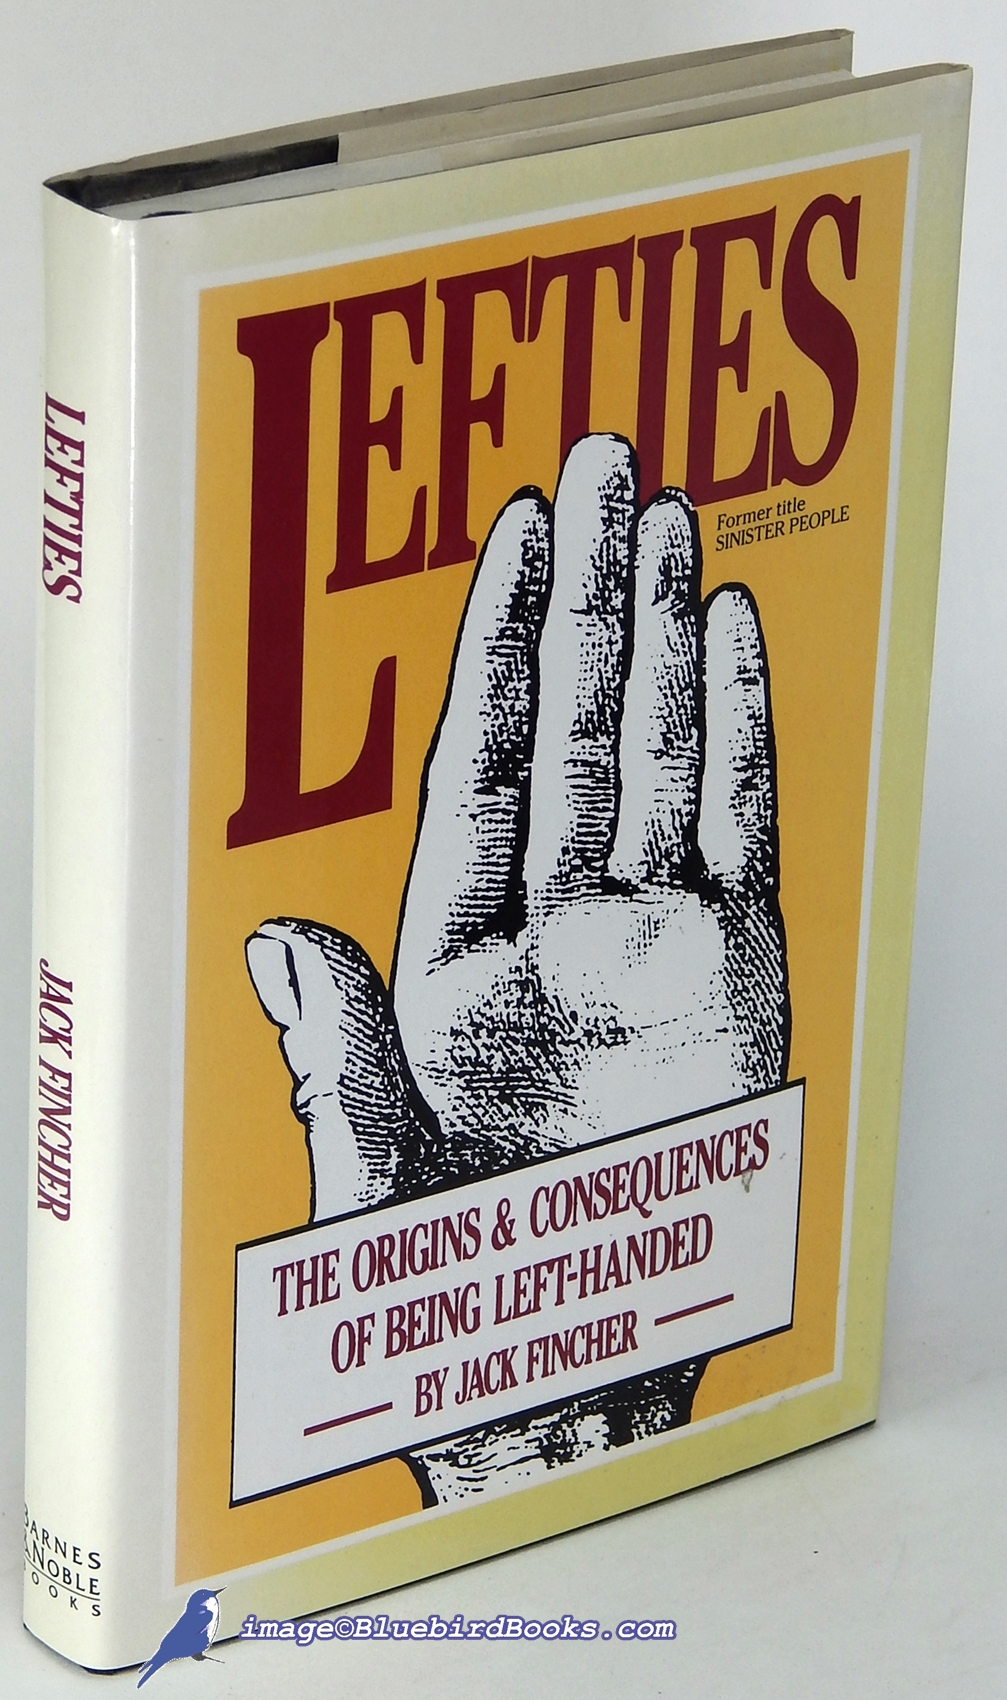 FINCHER, JACK - Lefties: The Origins and Consequences of Being Left-Handed